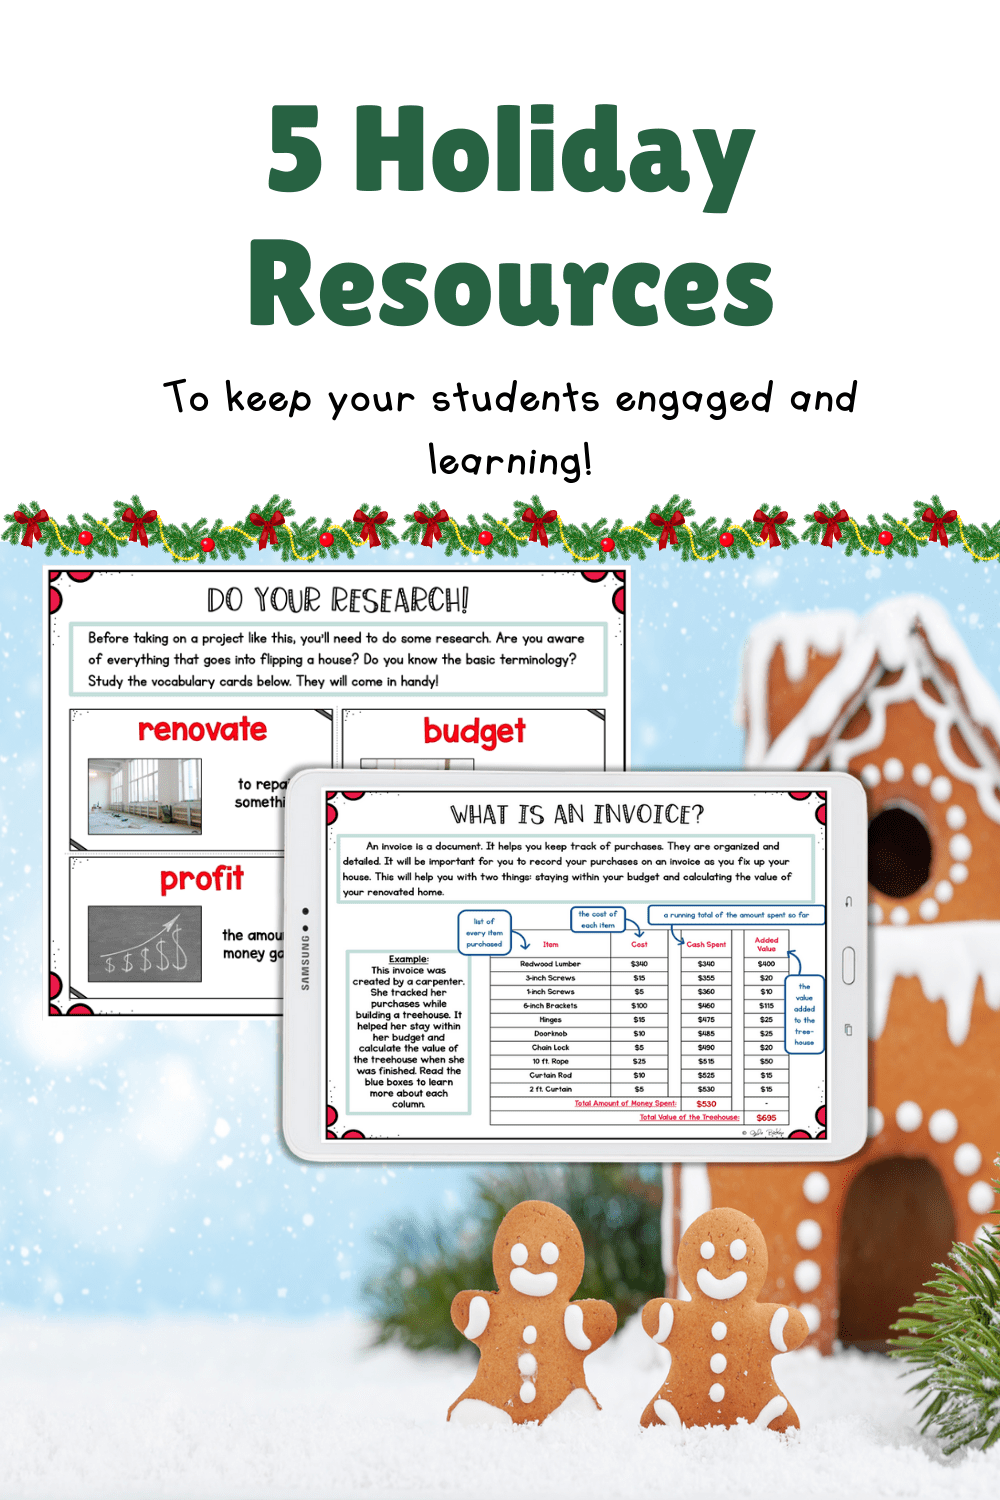 5 holiday resources to keep your students engaged and learning before break